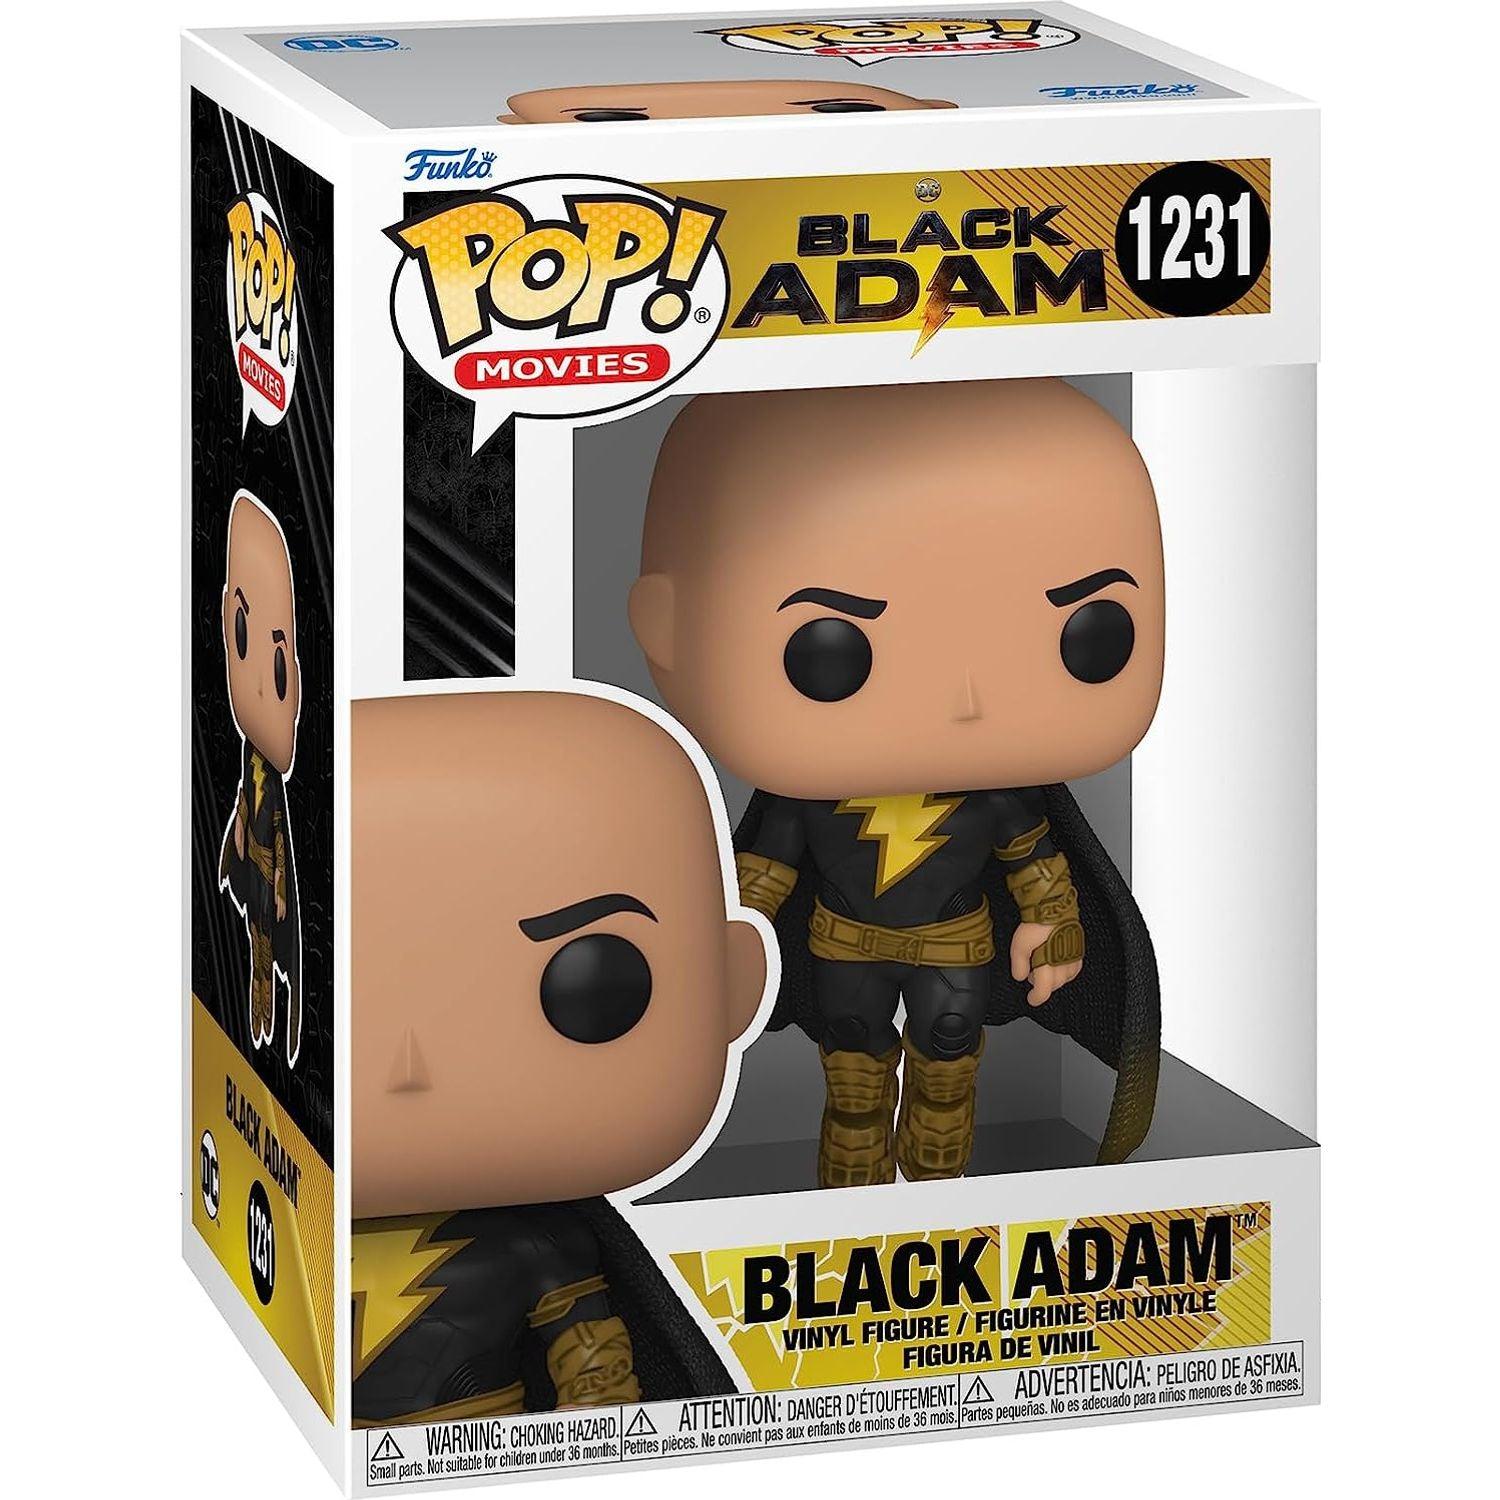 Funko Pop! Movies Black Adam - Flying with Cape - BumbleToys - 18+, Action Figures, Boys, Characters, DC Comics, Figures, Funko, Pre-Order